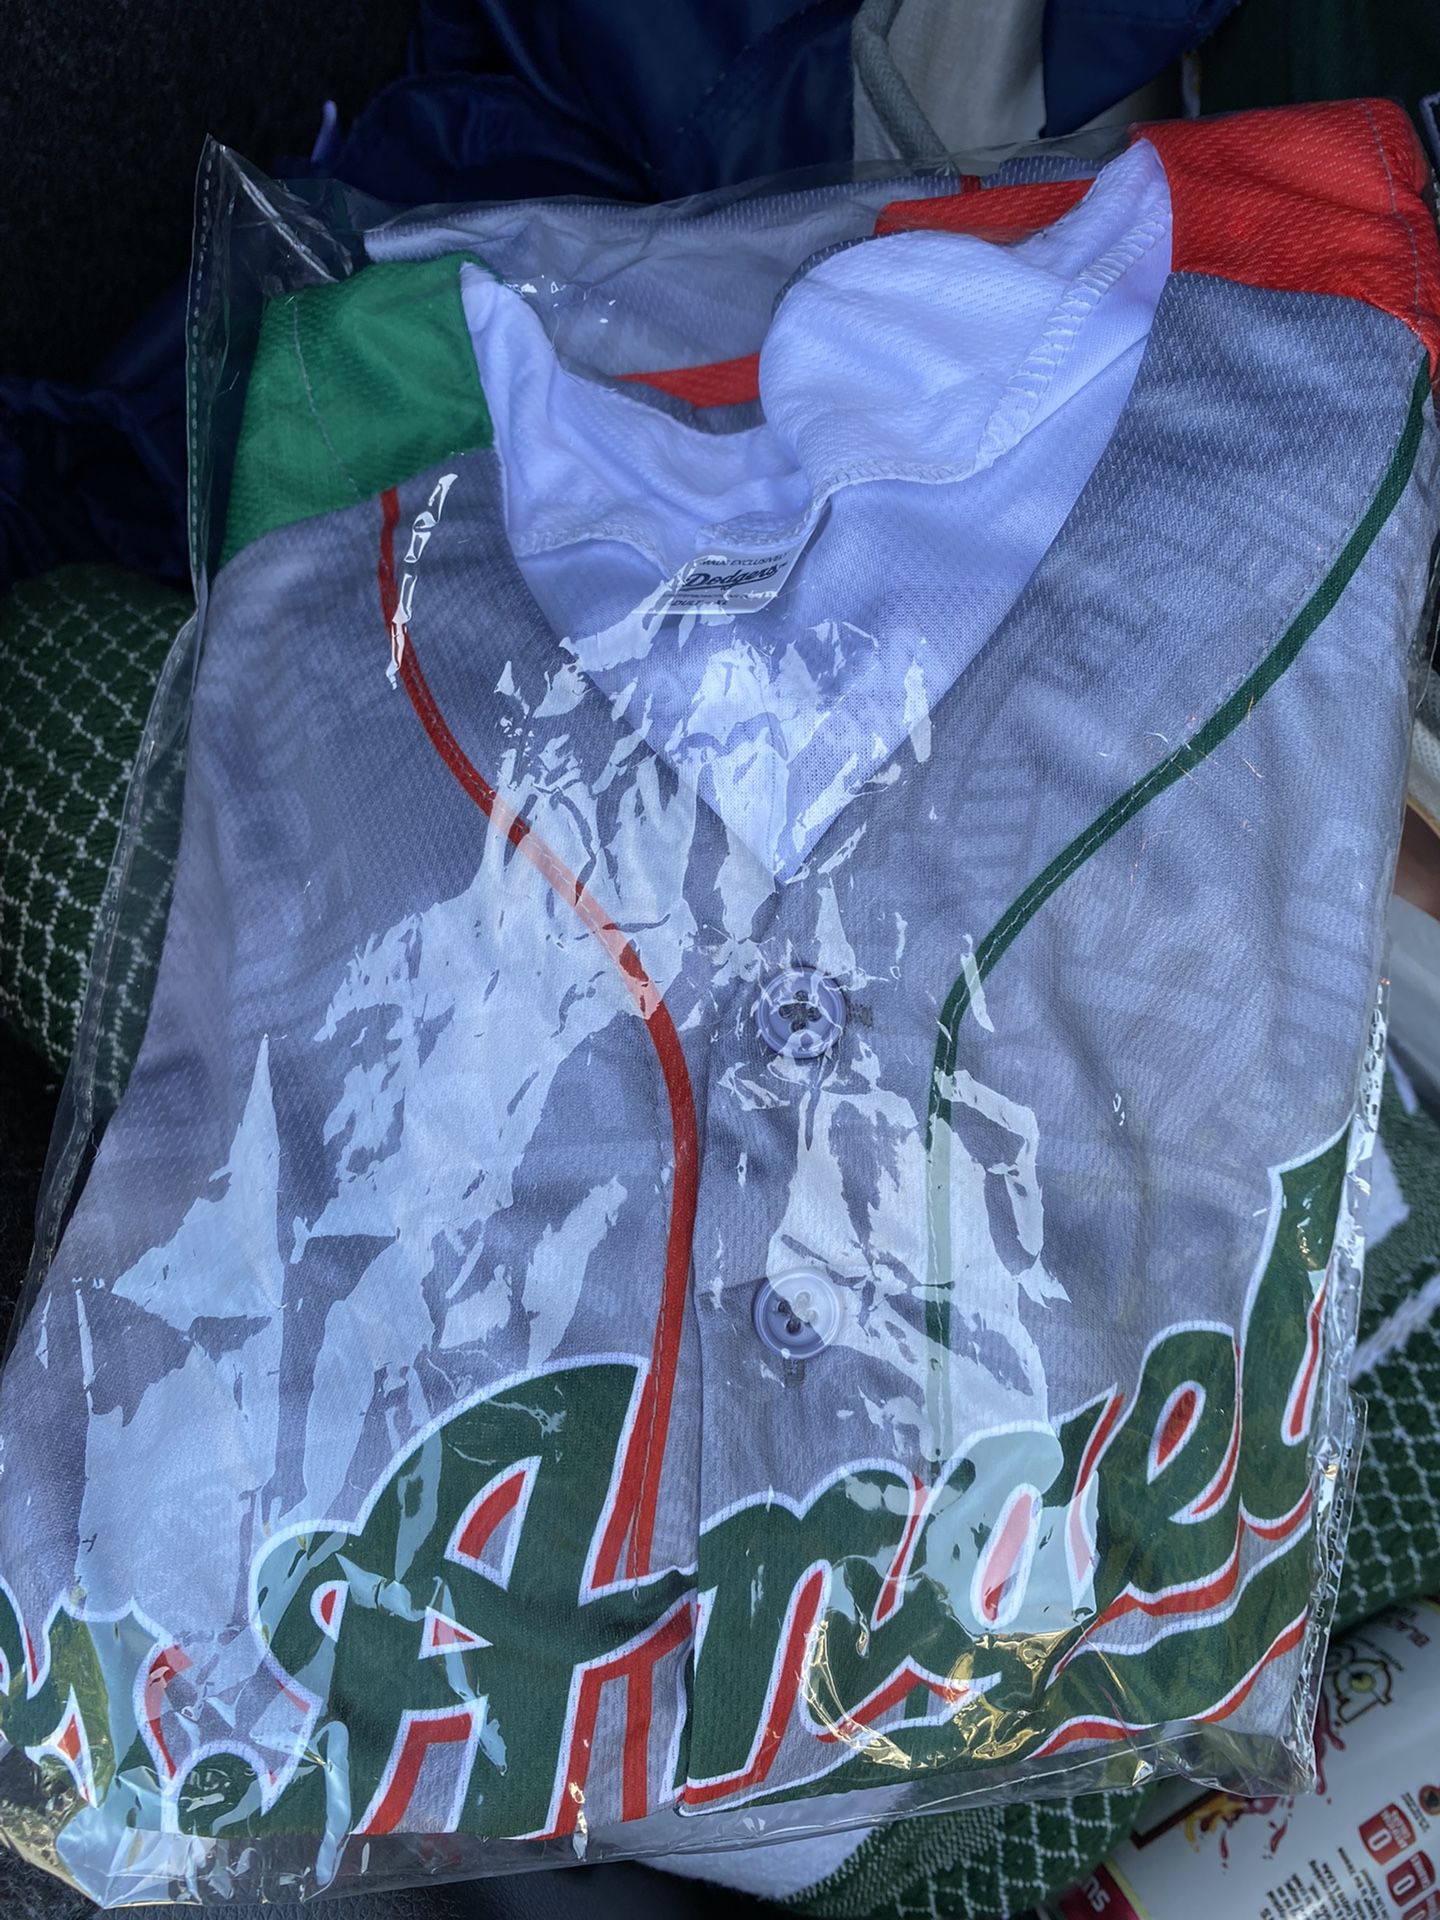 Dodgers Mexican Heritage Jersey 2022 for Sale in Oxnard, CA - OfferUp